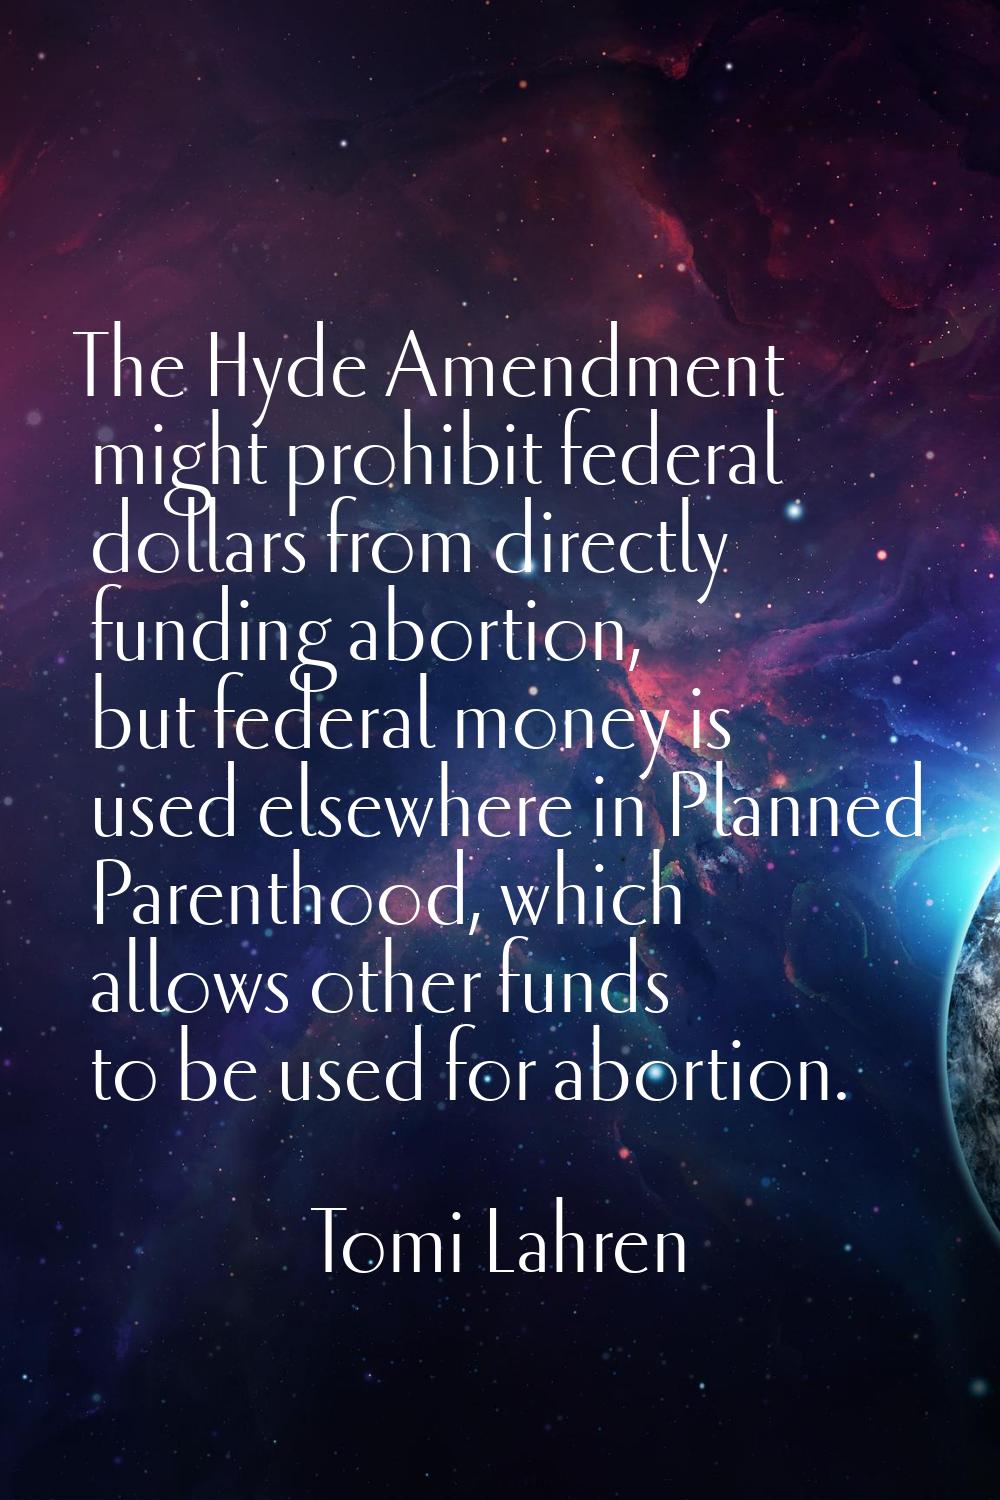 The Hyde Amendment might prohibit federal dollars from directly funding abortion, but federal money